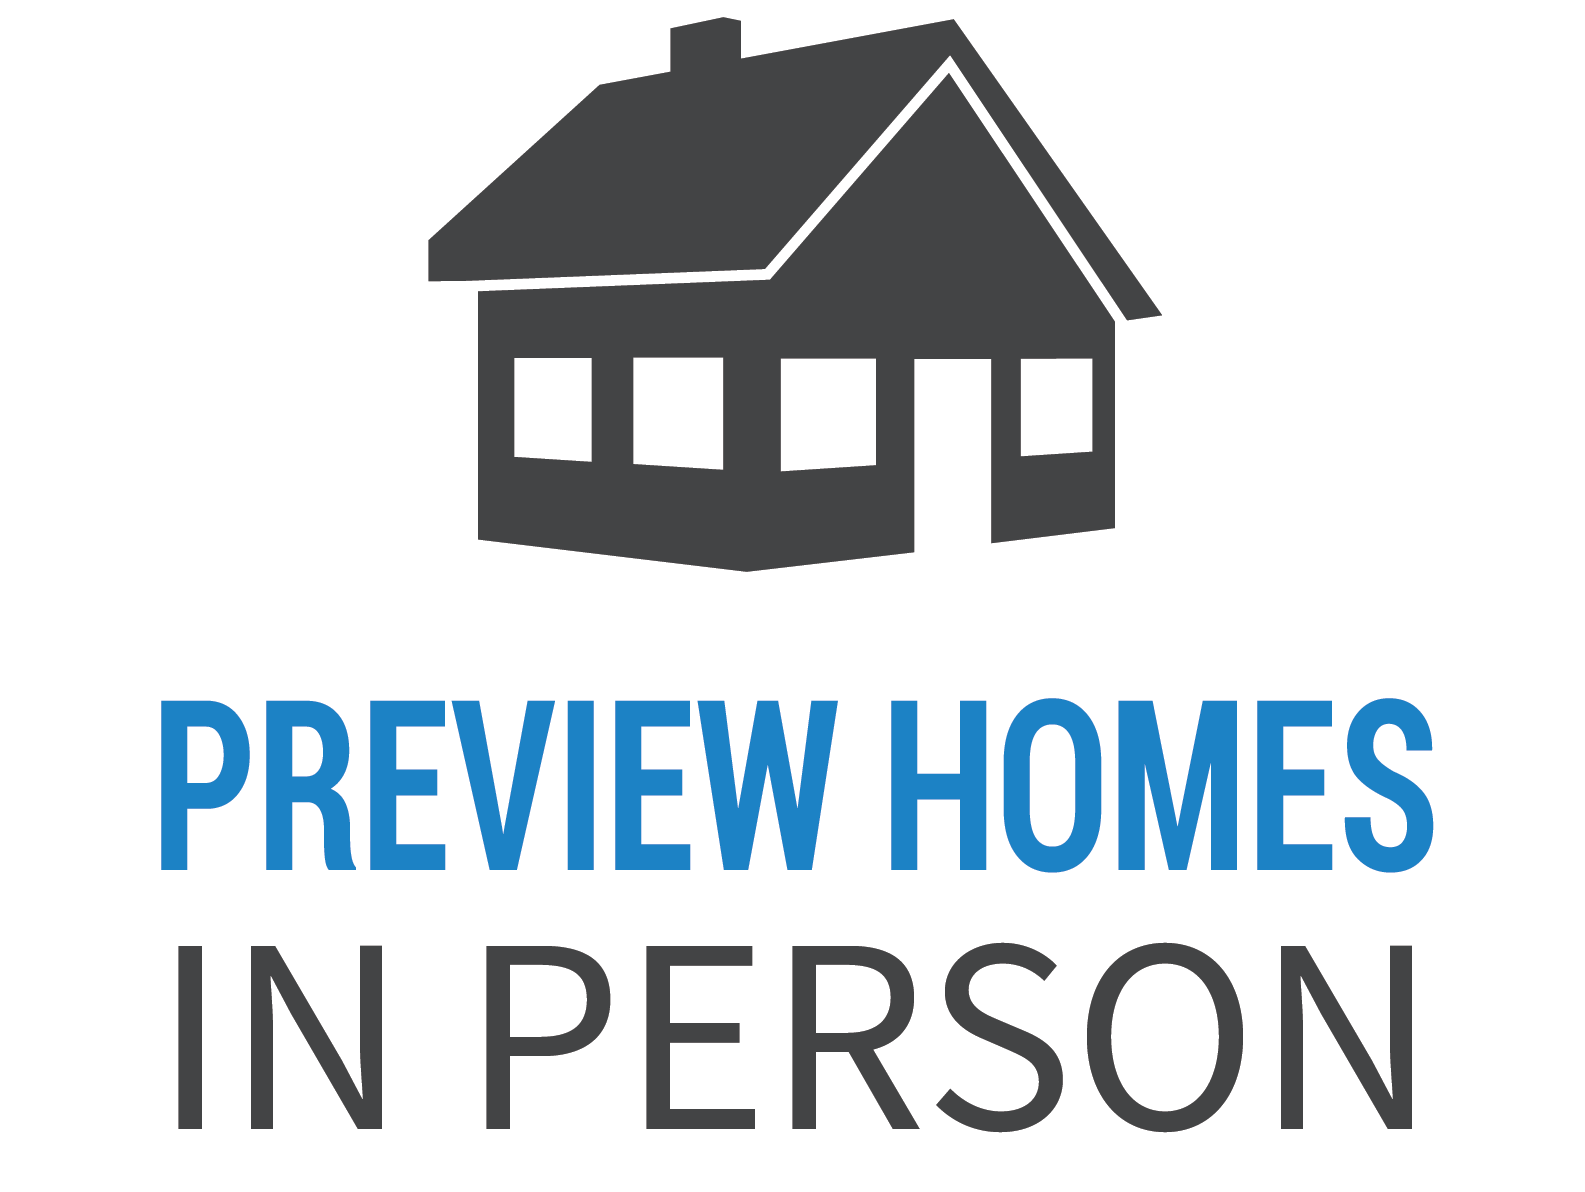 Preview Homes in Person